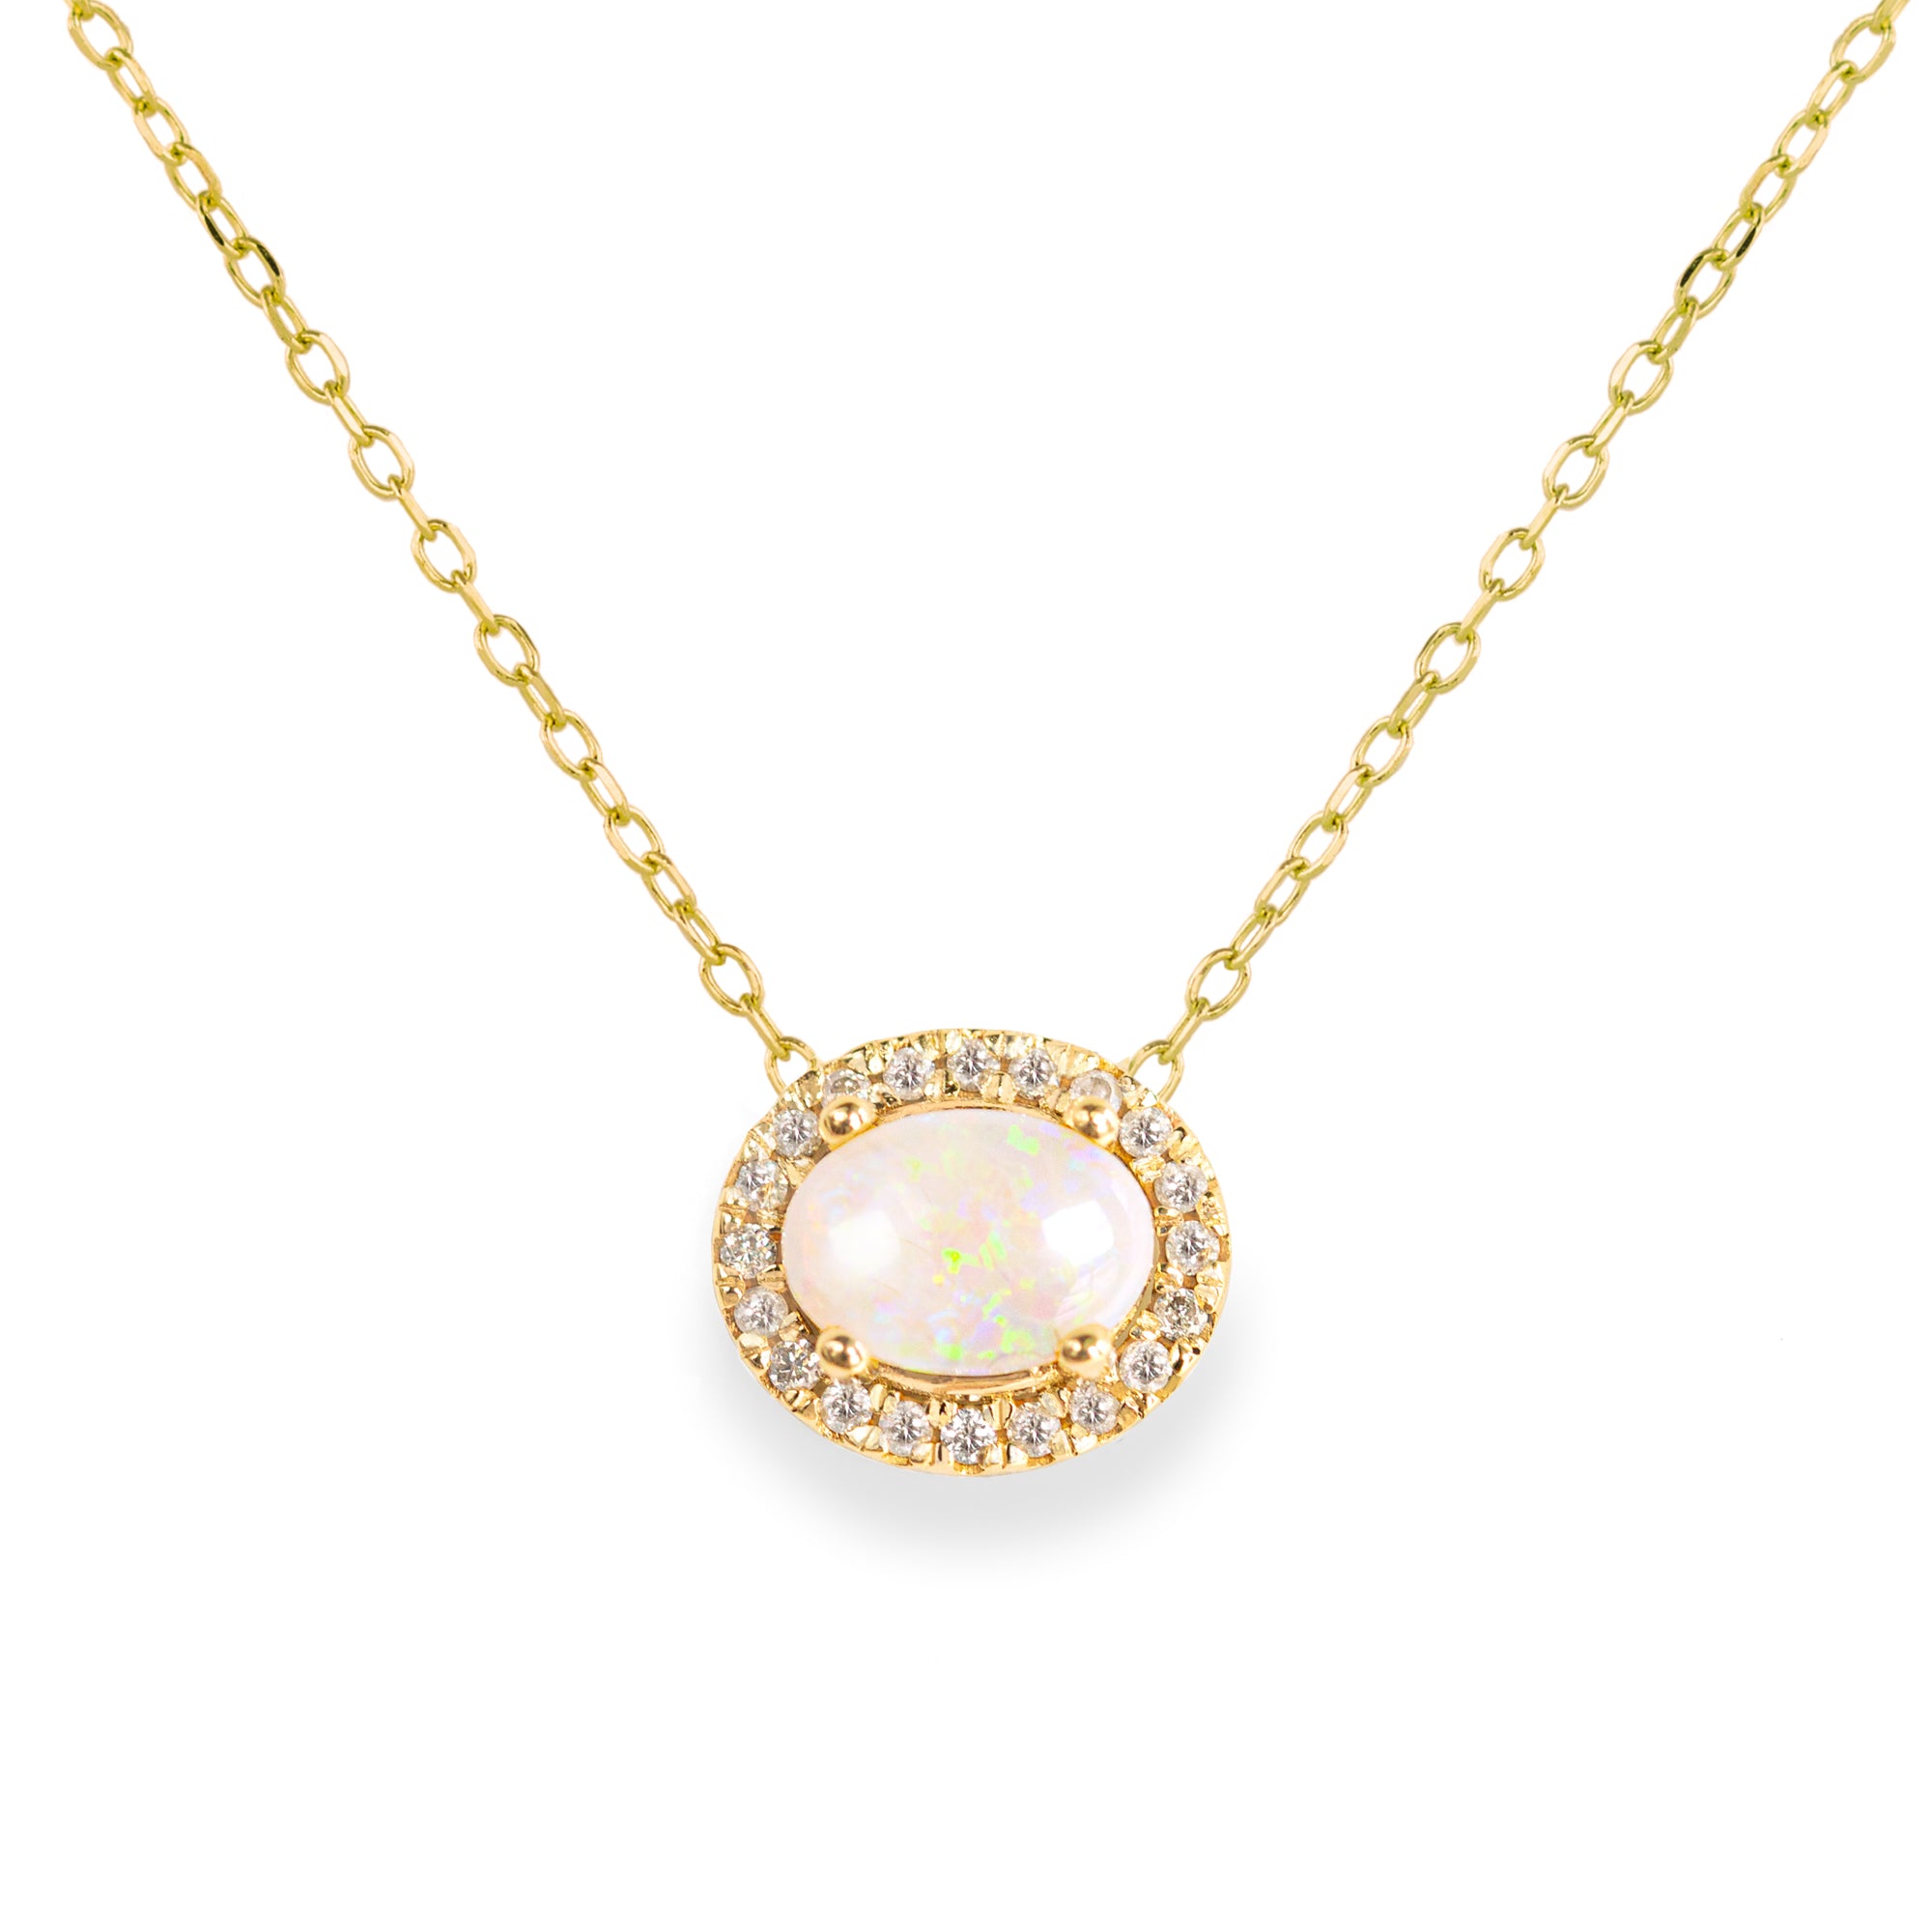 Jamie Park Jewelry -Opal Diamond Halo Necklace This necklace is the epitome of luxury, featuring an oval Australian opal surrounded by a radiant halo of natural diamonds. A symbol of hope and purity, it makes the perfect gift for any special occasion.